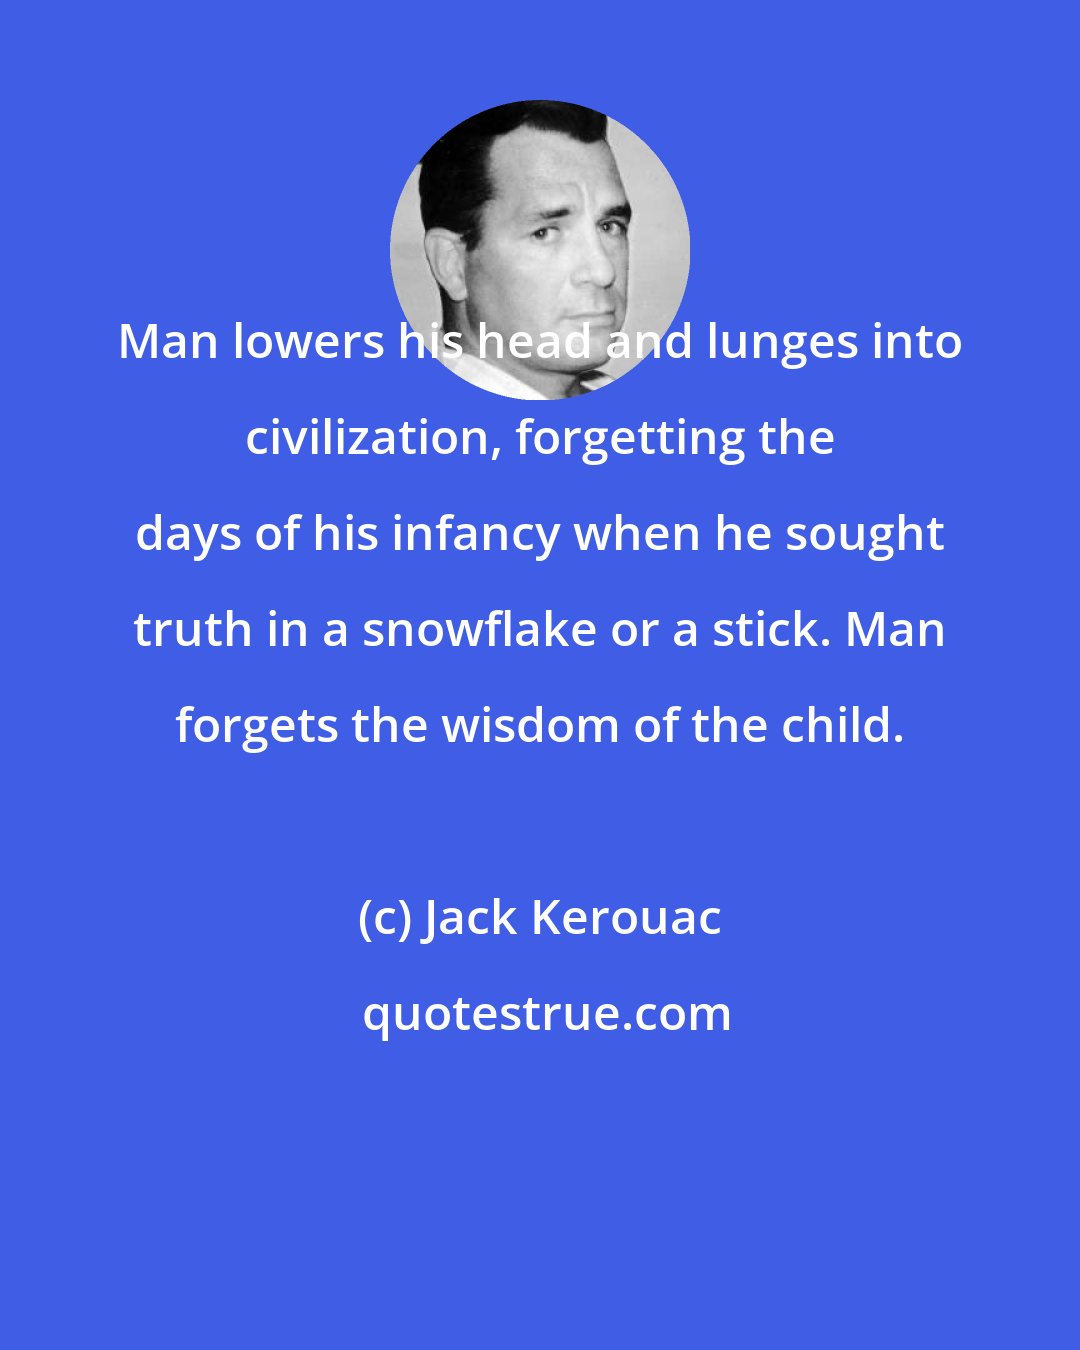 Jack Kerouac: Man lowers his head and lunges into civilization, forgetting the days of his infancy when he sought truth in a snowflake or a stick. Man forgets the wisdom of the child.